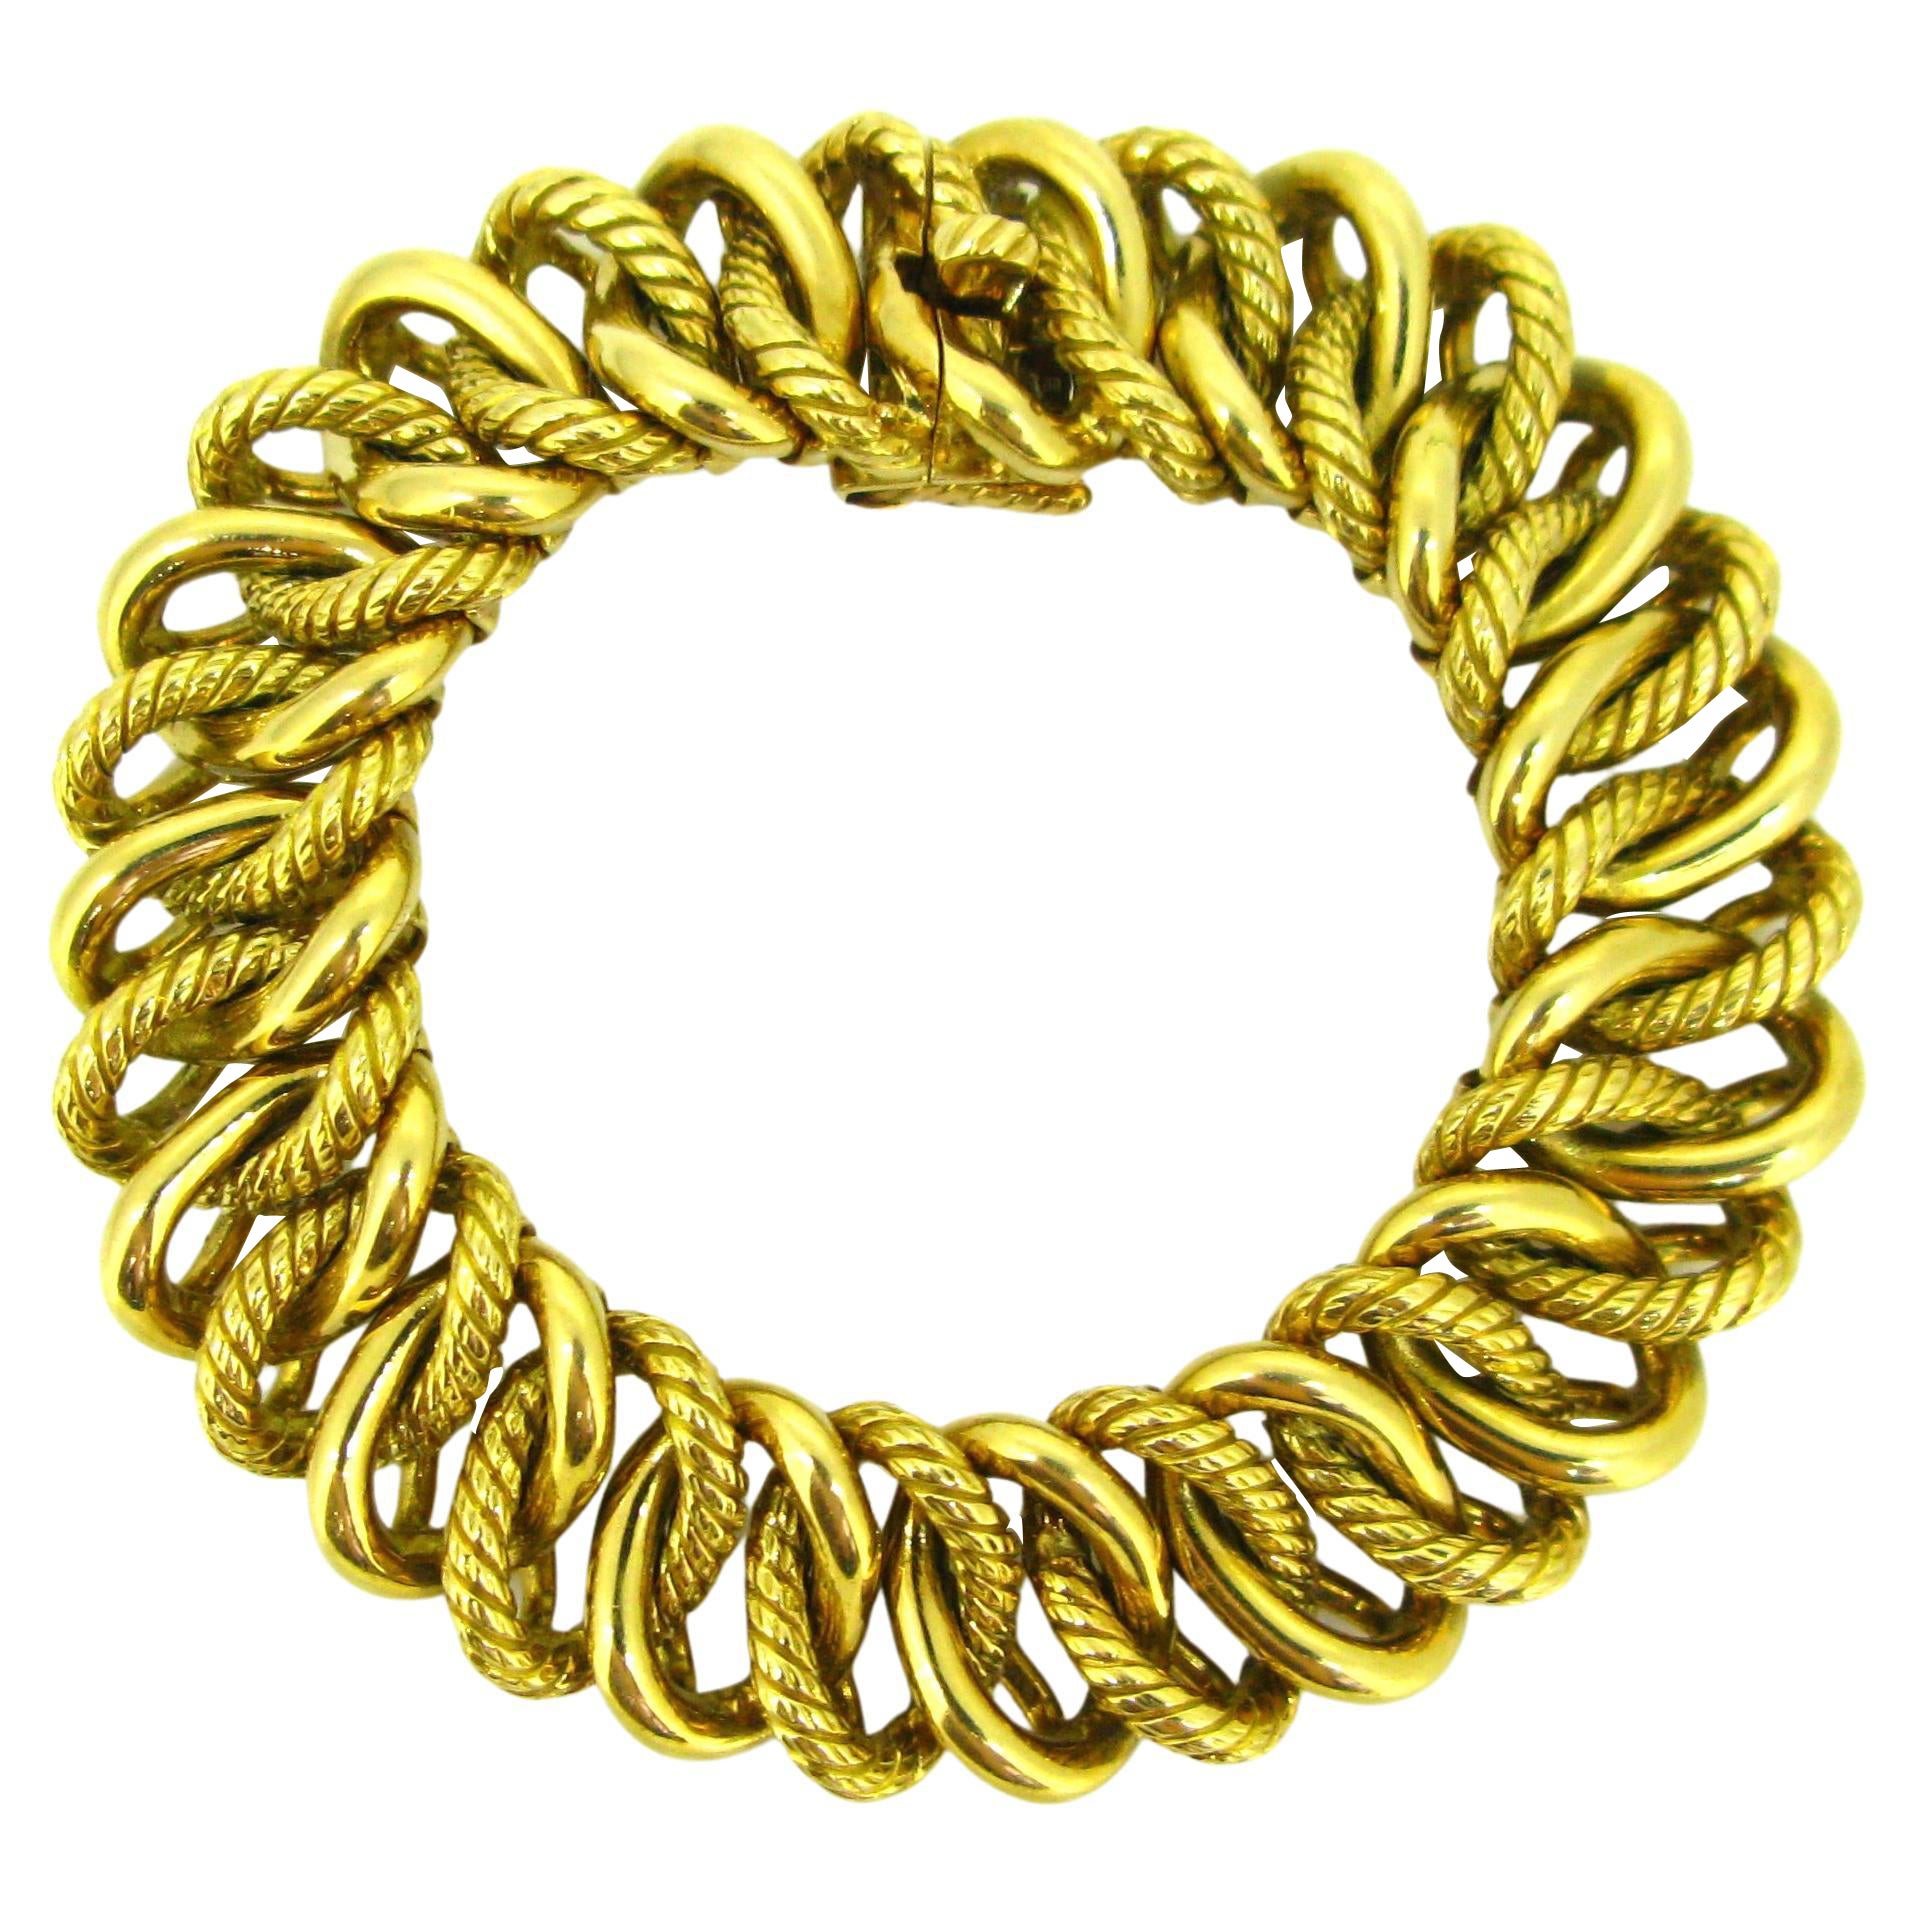 Georges Lenfant for OJ Perrin Curb Links Yellow Gold Bracelet